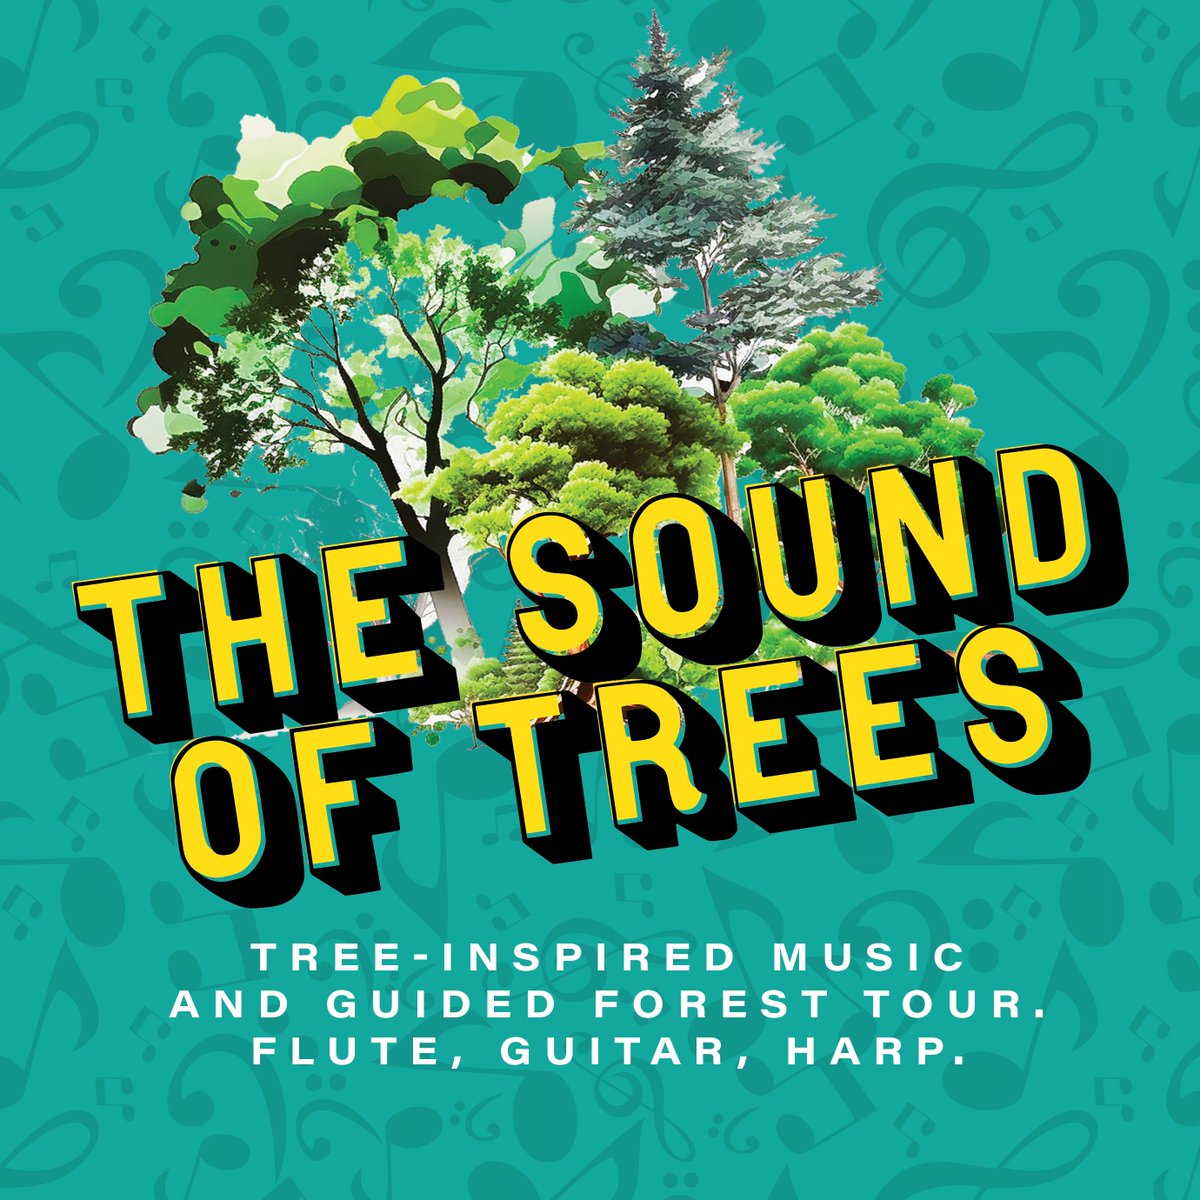 We look forward to welcoming 4th Wall Music back to the John R. Park Homestead for another special performance:  The Sound of Trees  wix.to/5wyRQ3X
#rsvpnow #savethedate